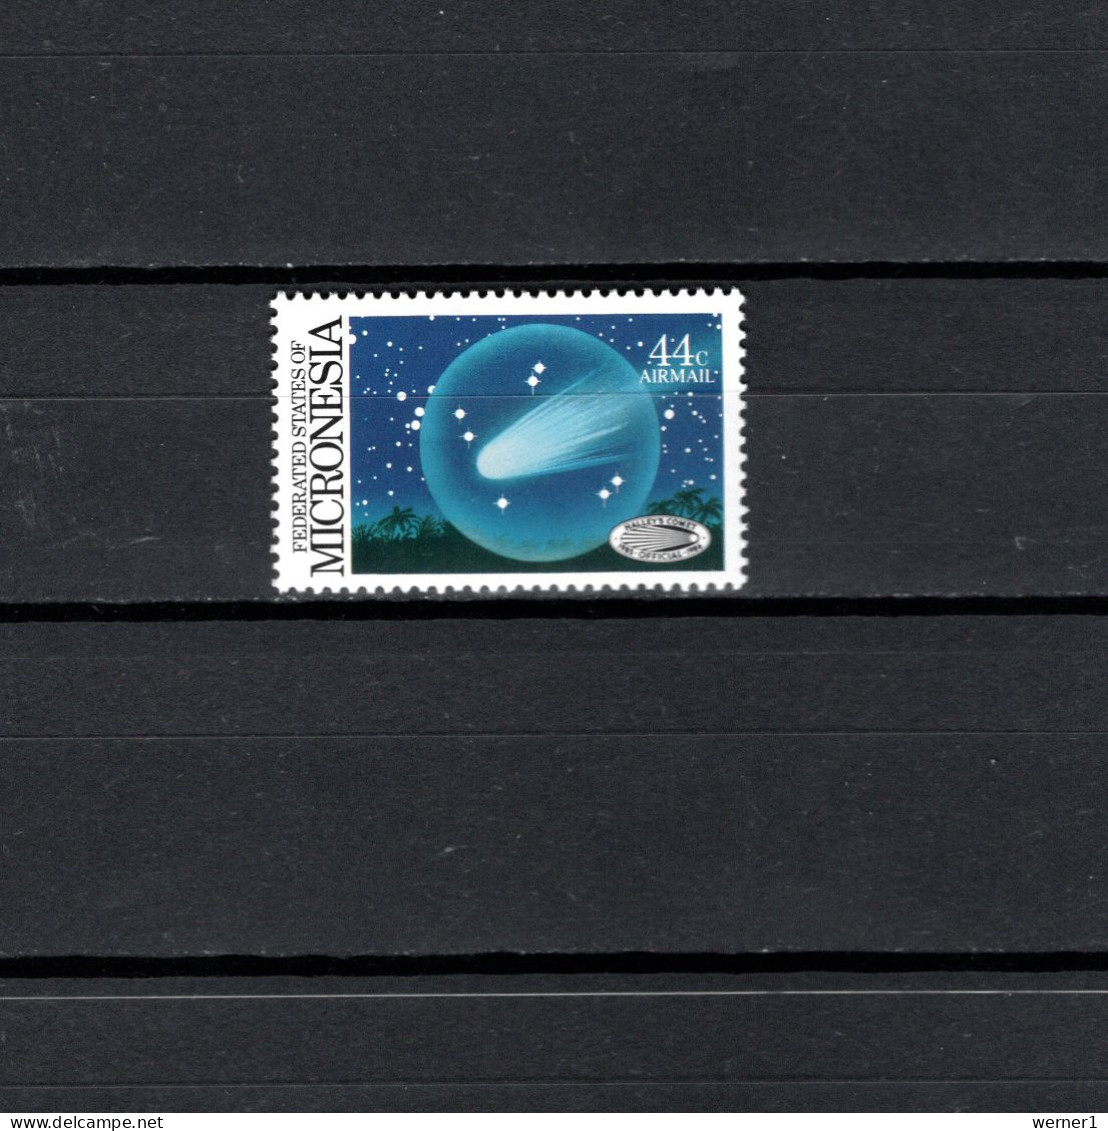 Micronesia 1986 Space, Halley's Comet Stamp MNH - Oceanía